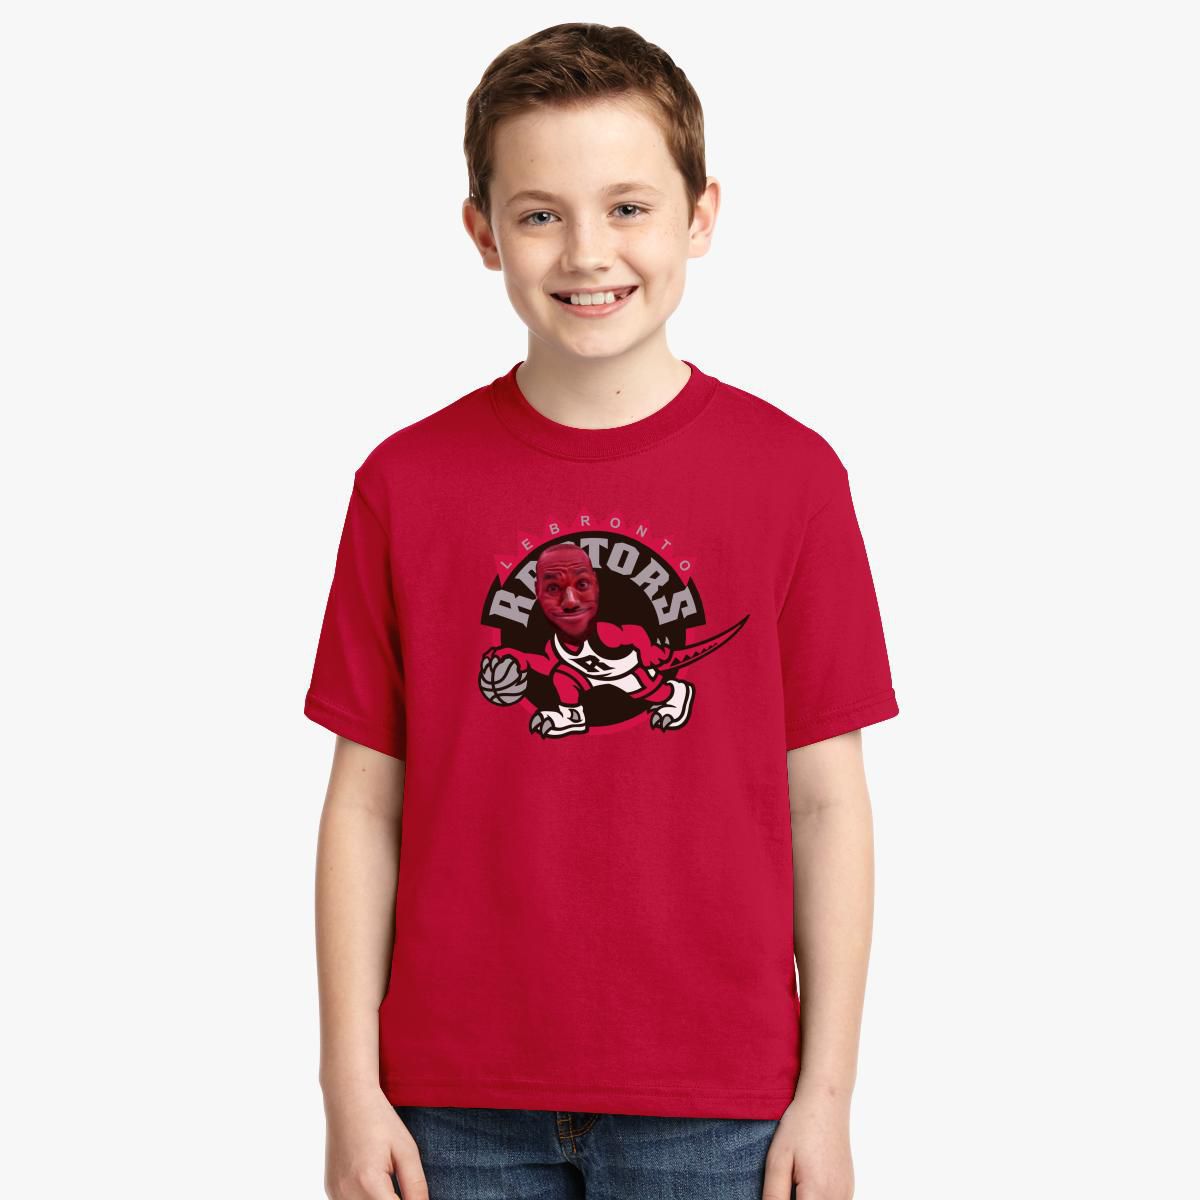 T-Shirt (Youth), Raptors with Sunglasses